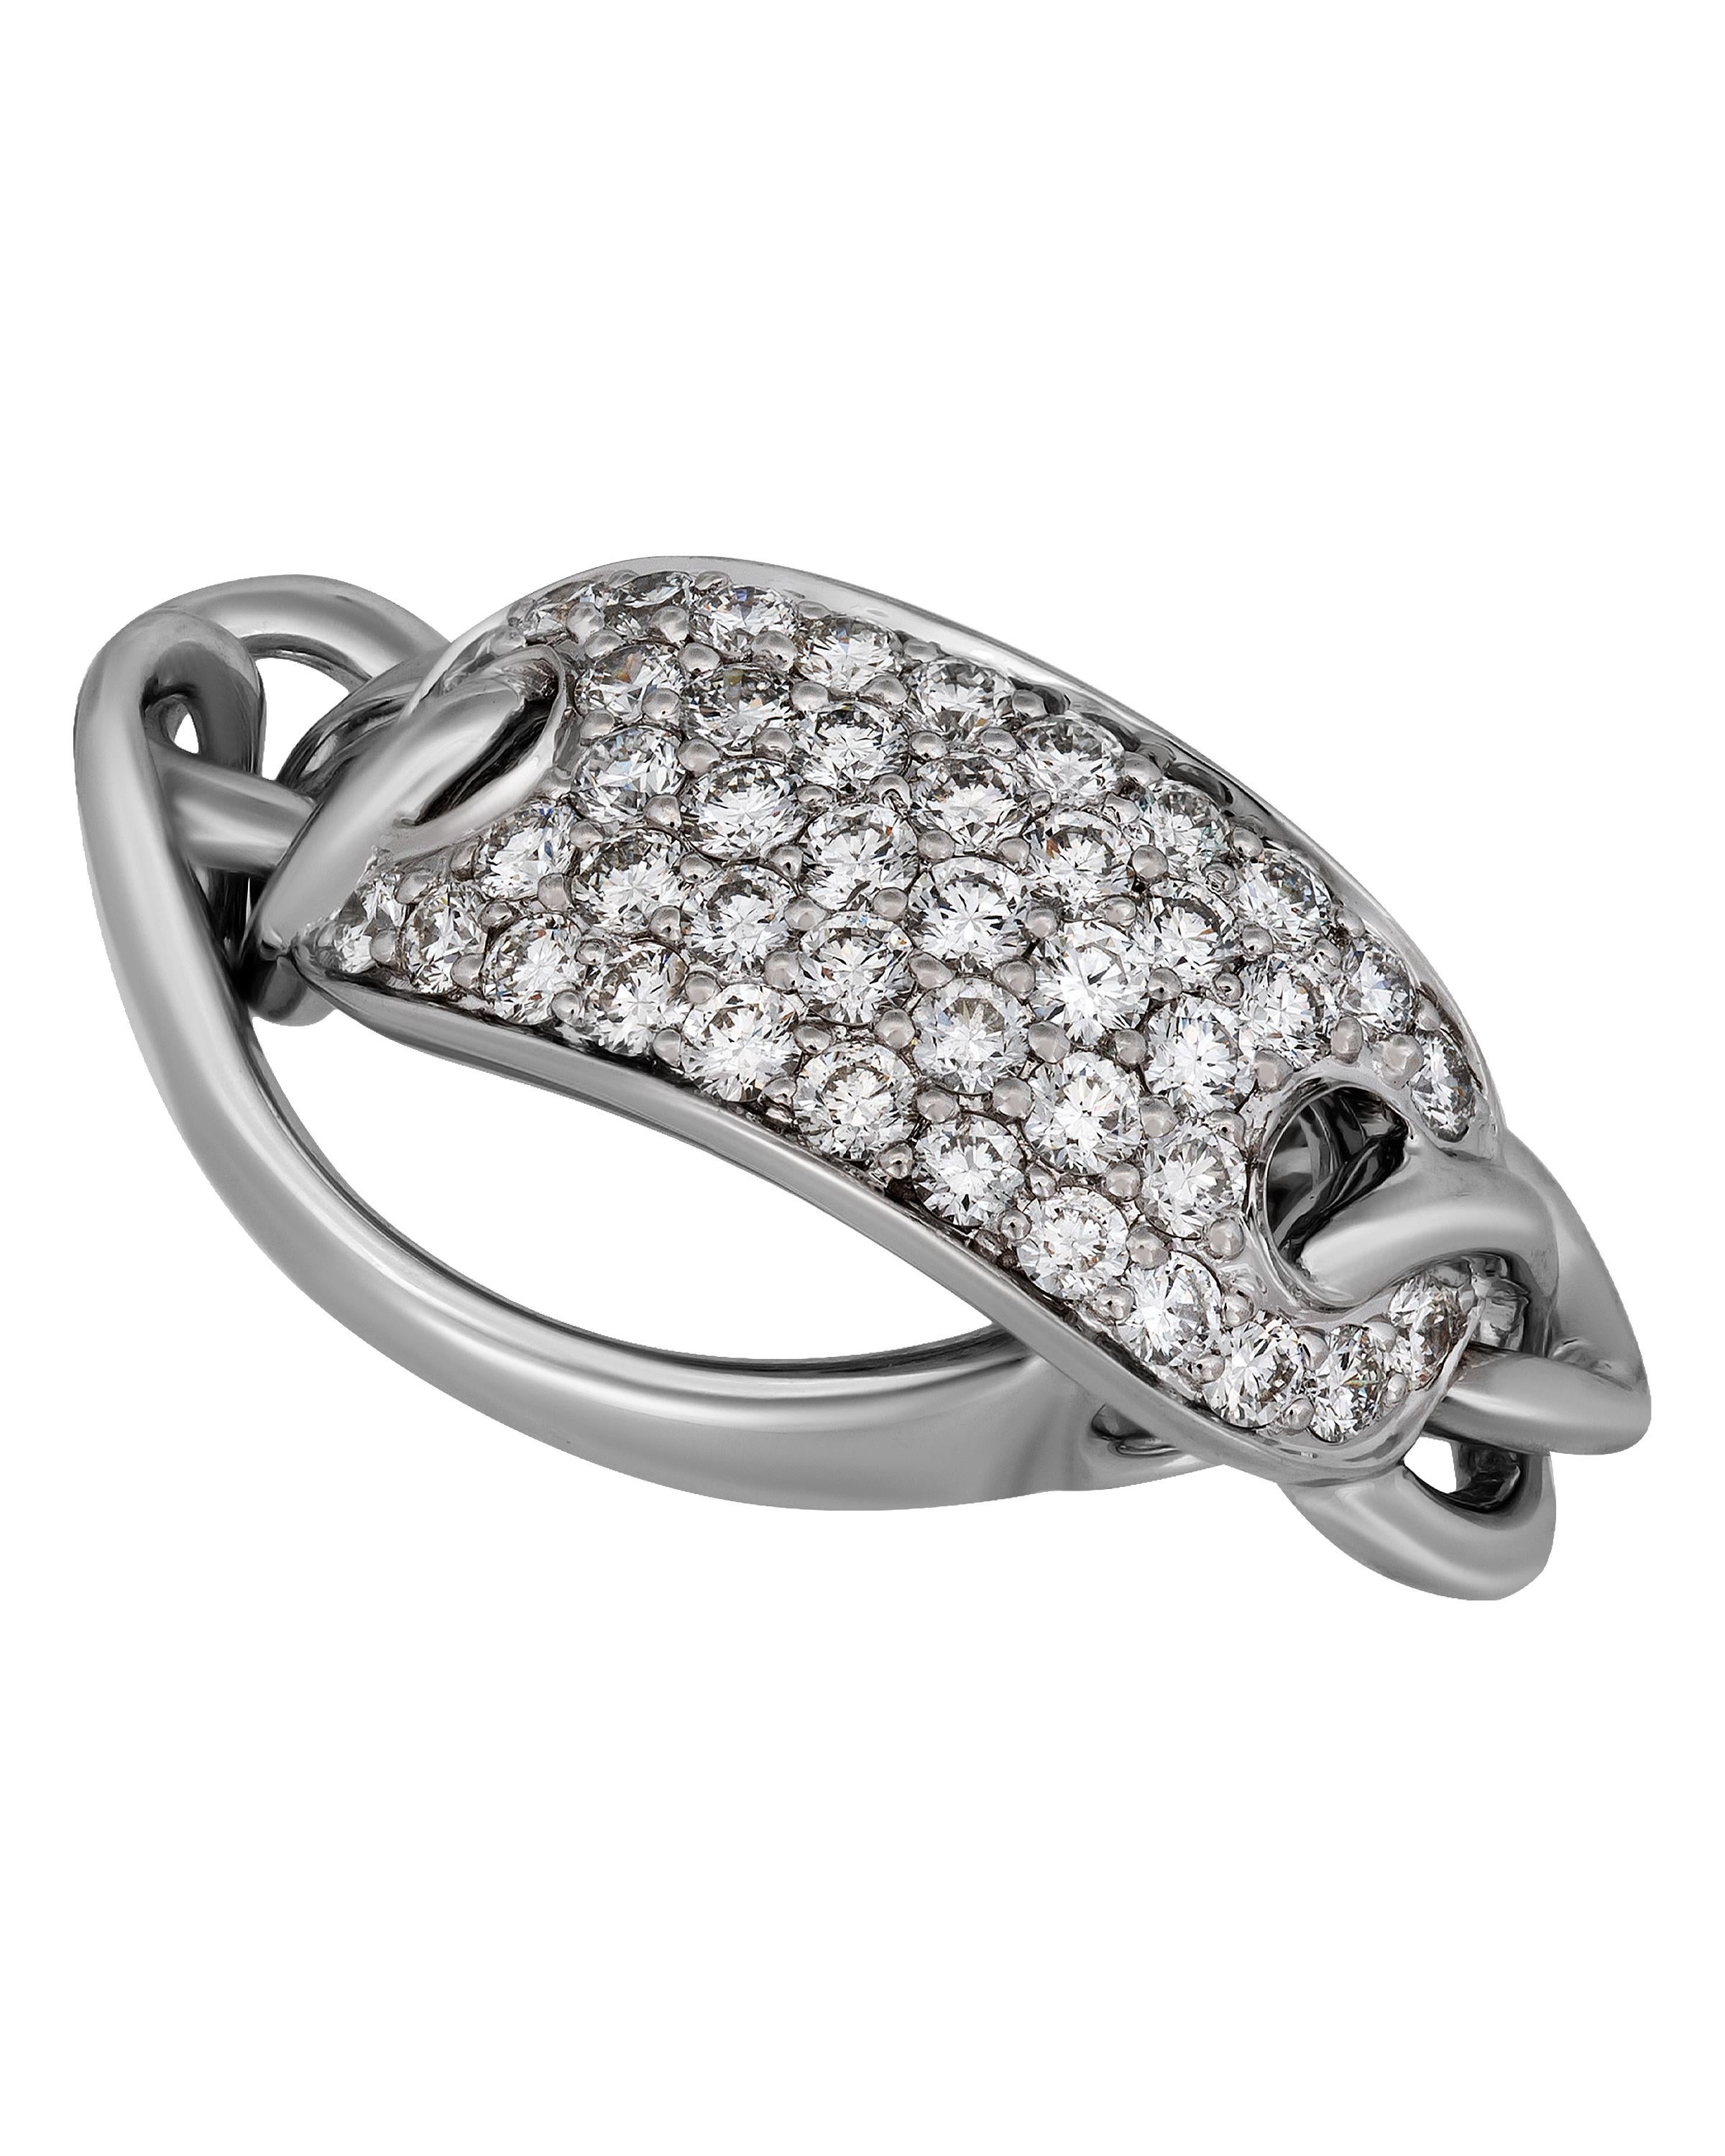 This glittering Piero Milano 18K White Gold Link Ring features a dazzling diamond station 0.91ct. tw. linked to a luscious white gold band. The ring size is 6.5 (53.1). The Decoration Size is 9mm. The Weight is 5.7g.
